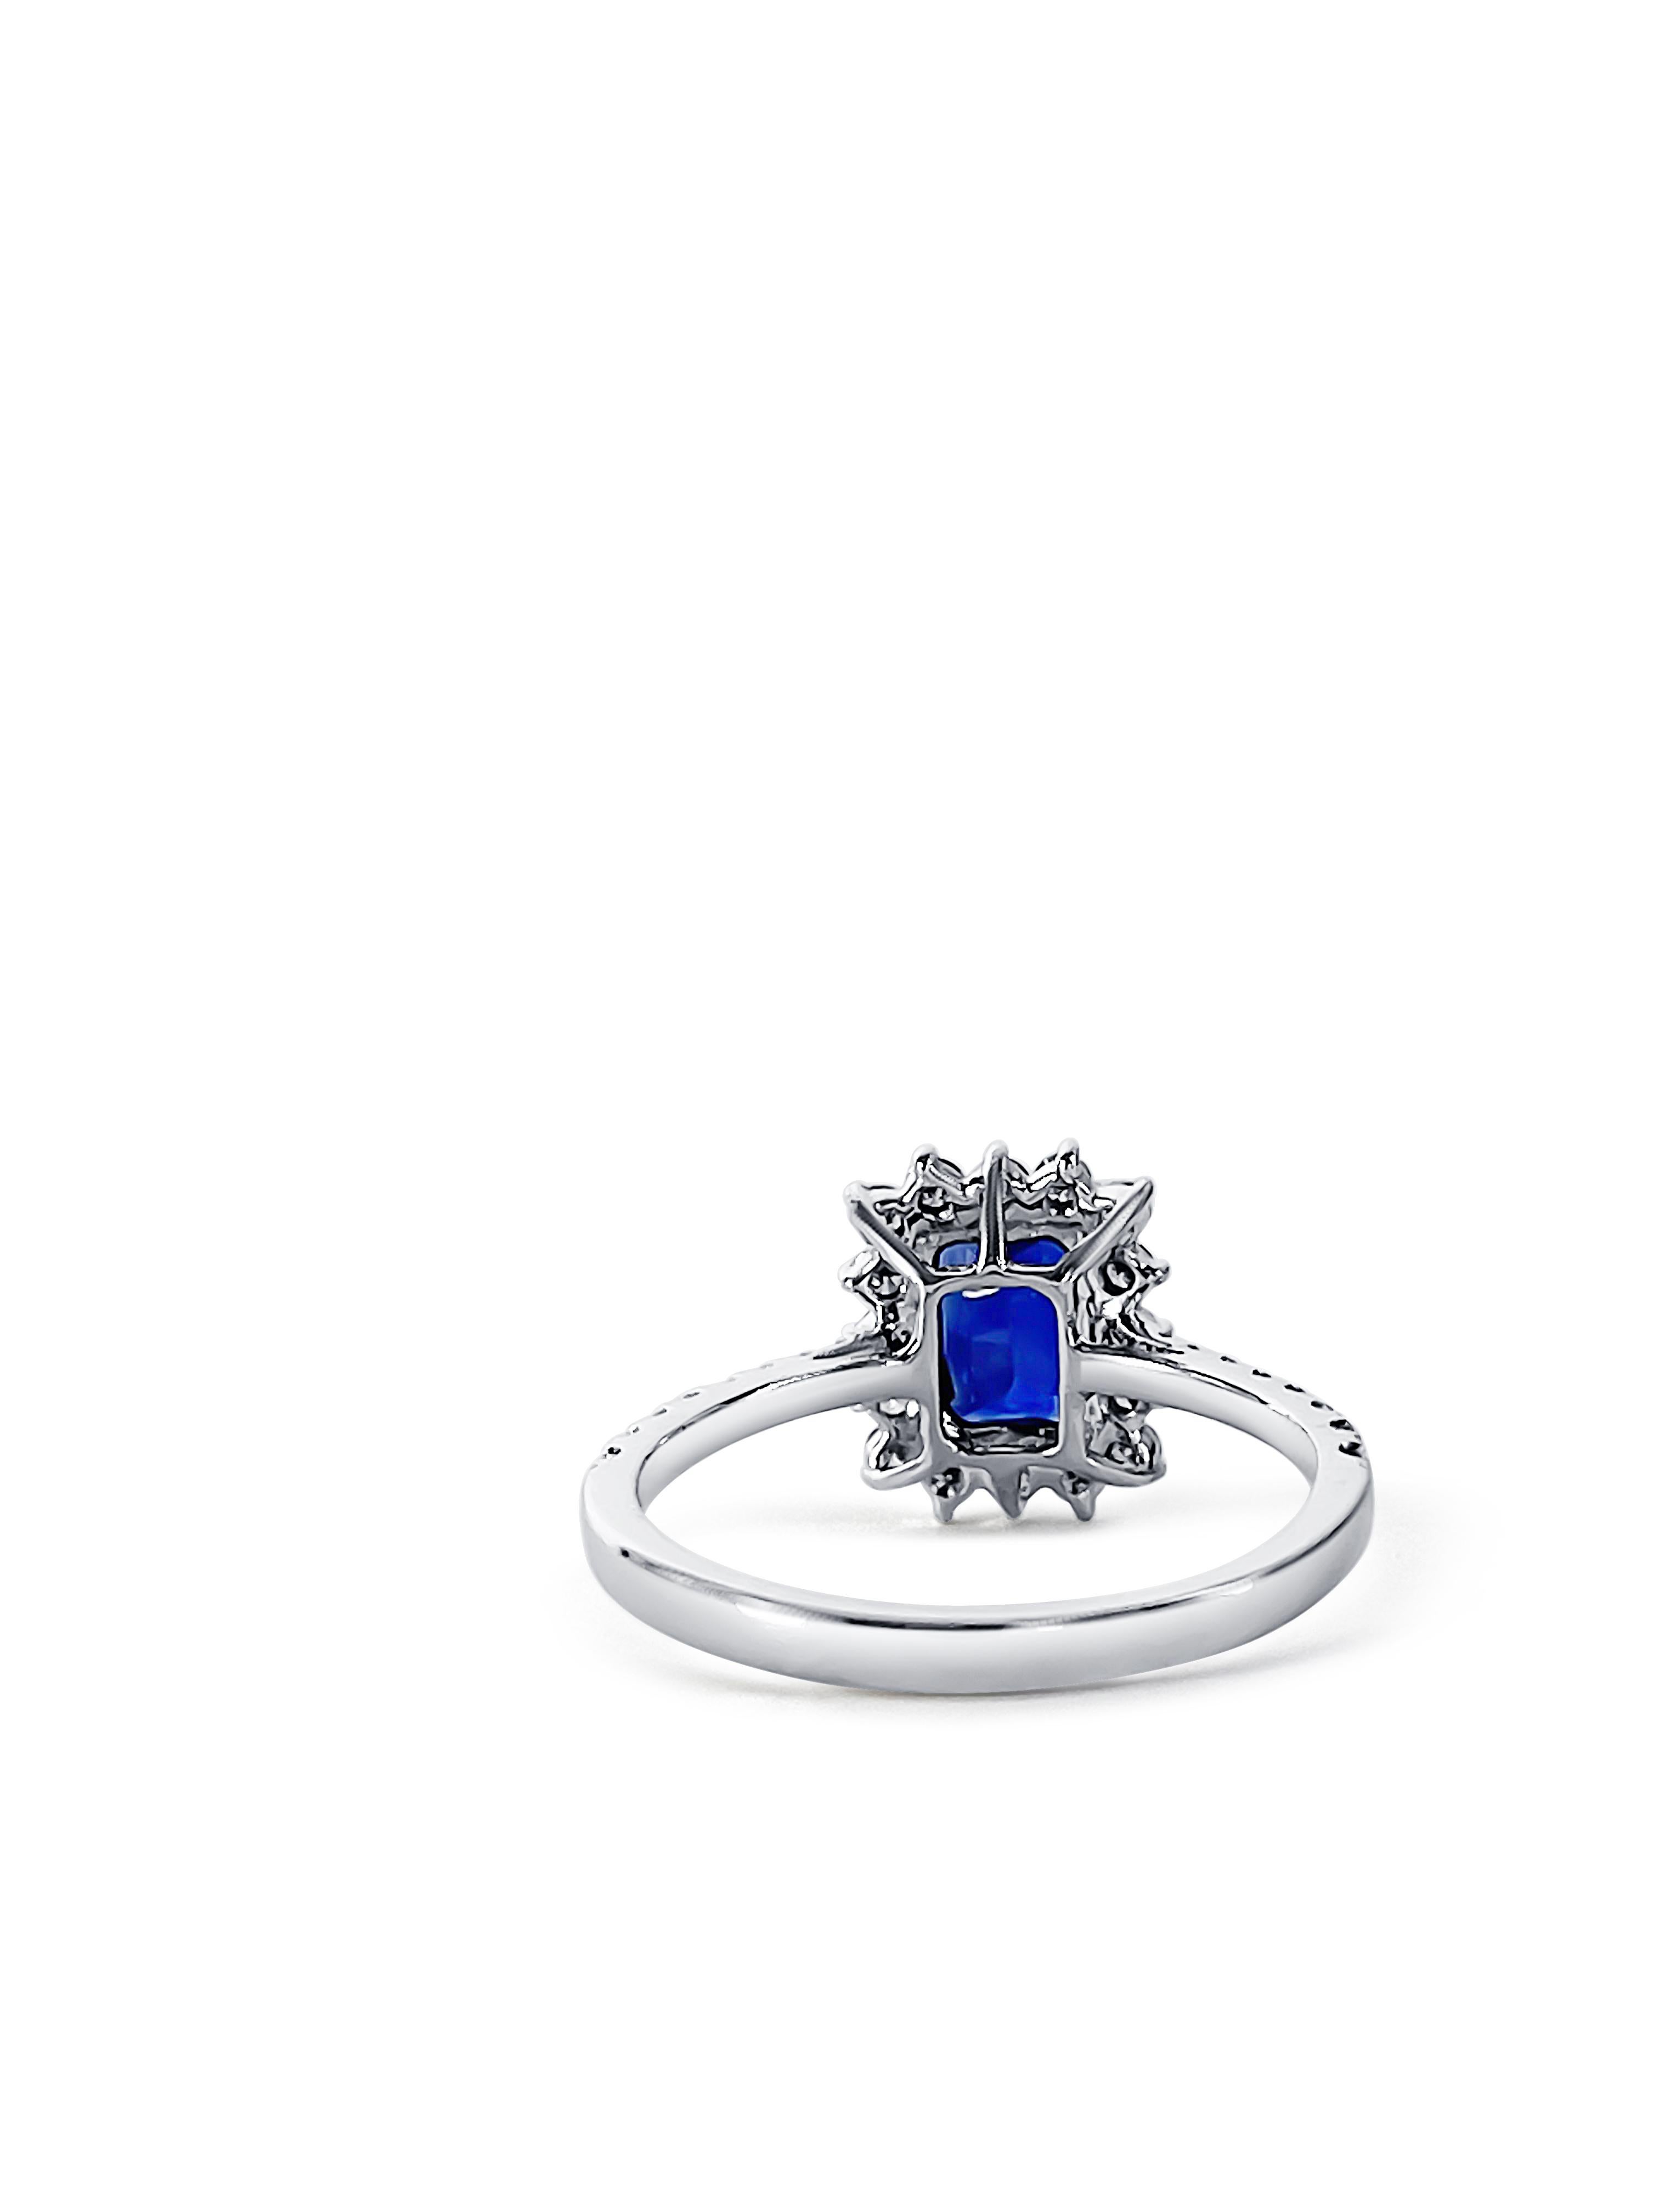 Square Cut 1.07 Carat Royal Blue Ceylon Natural Unheated Sapphire Ring  For Sale